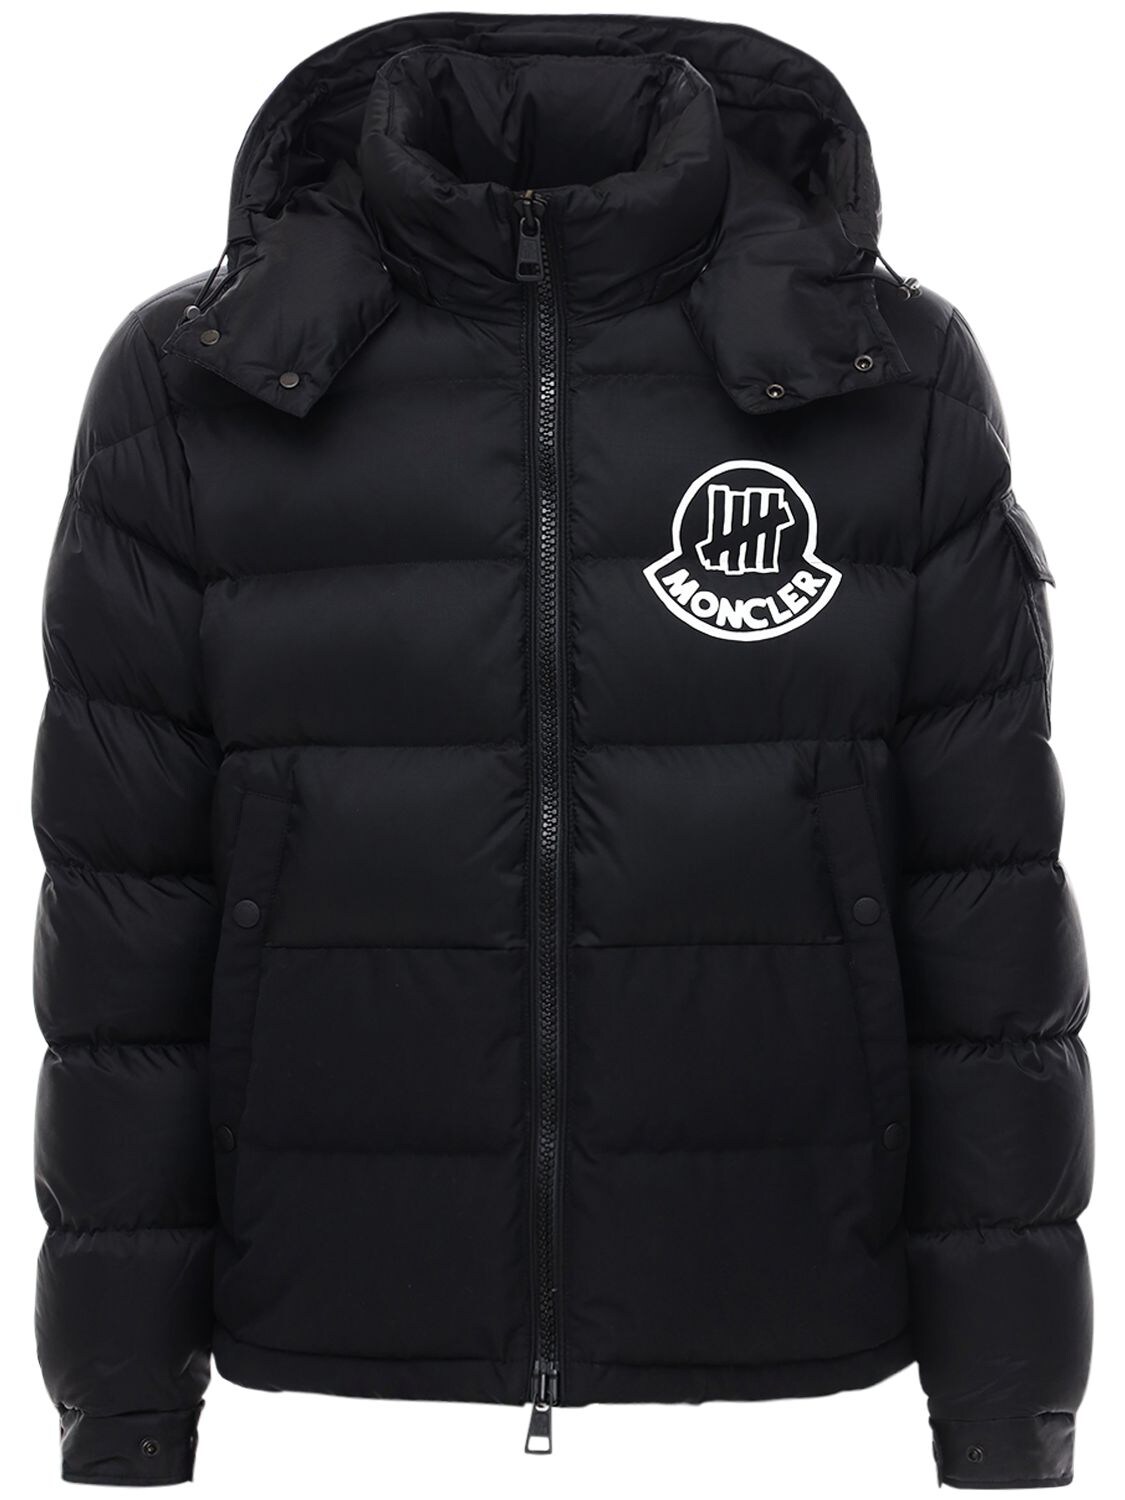 Moncler Genius 2 Moncler 1952 Black Undefeated Edition Down Arensky ...